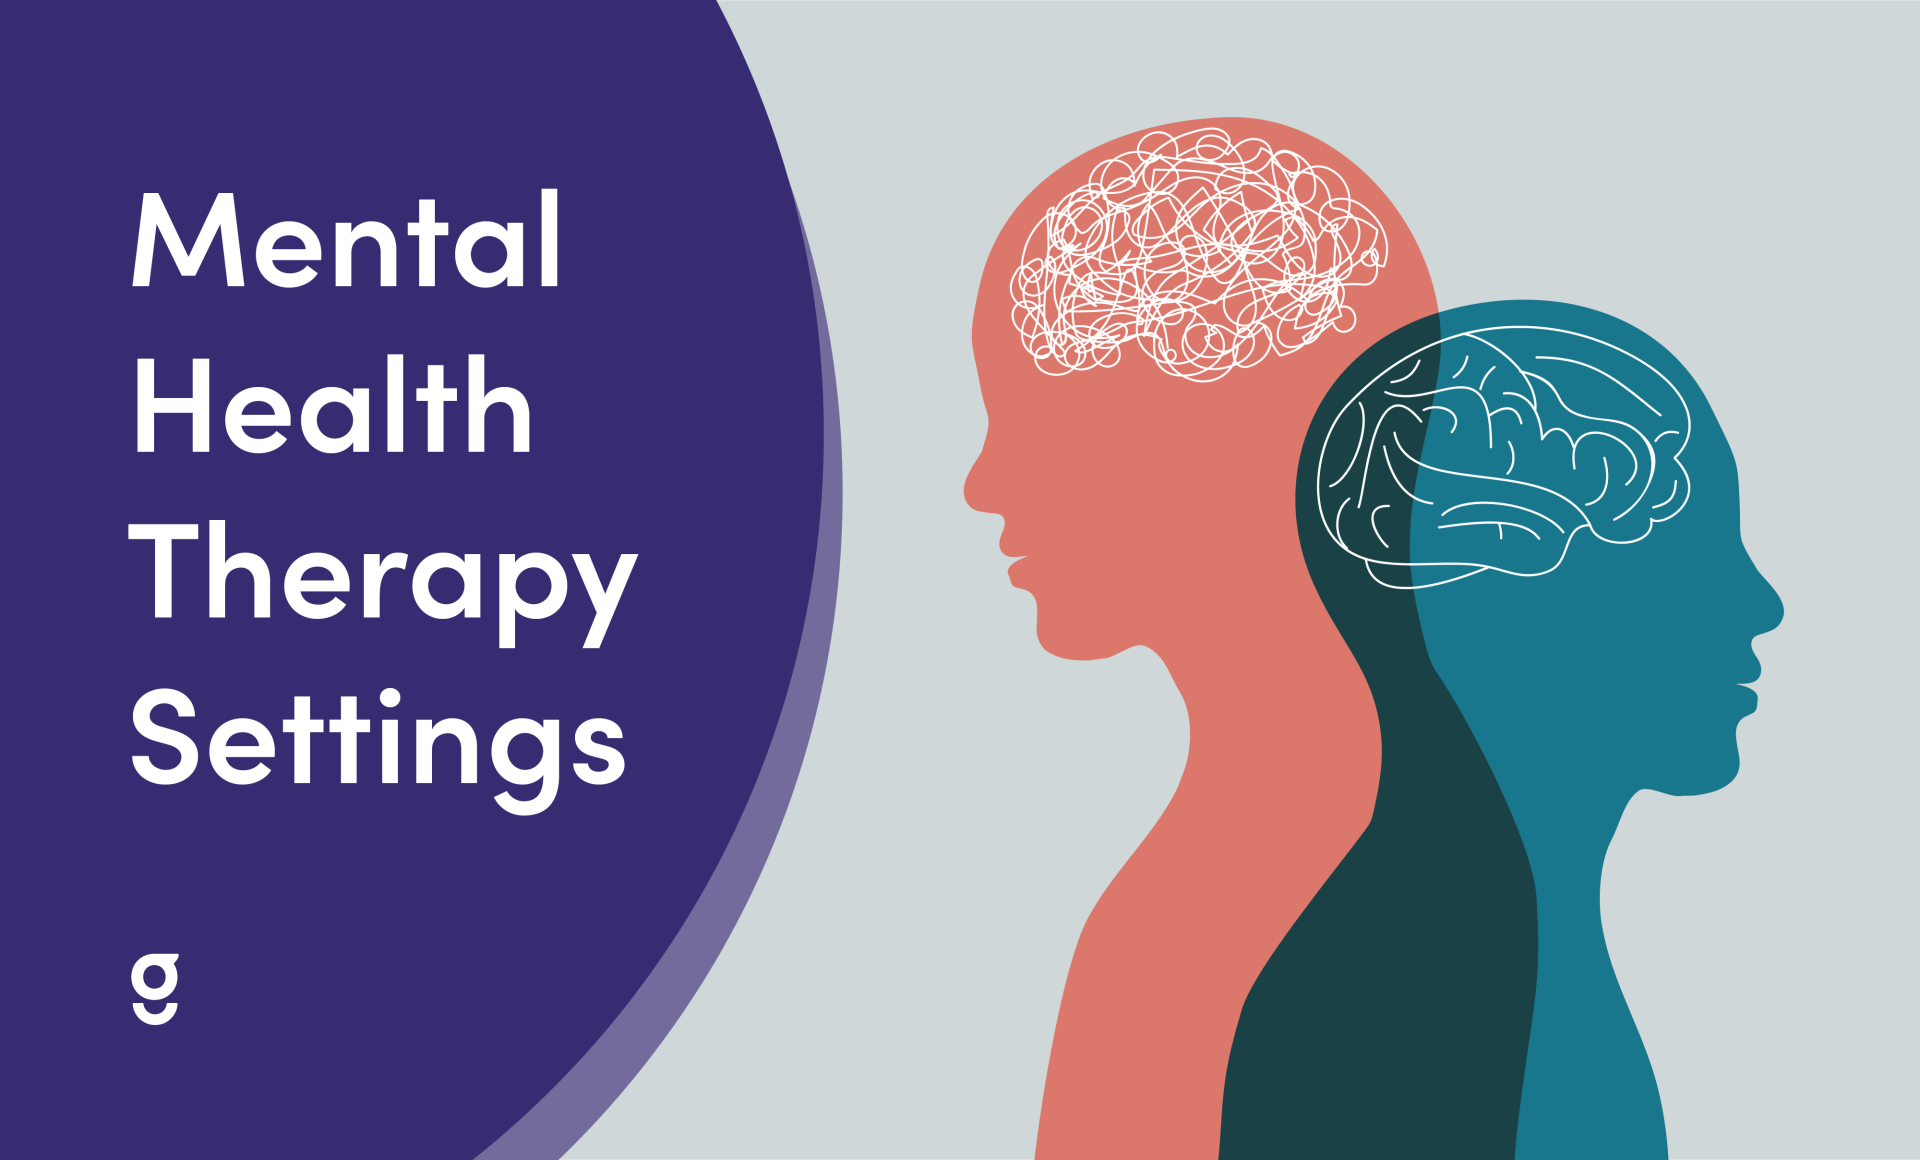 Mental Health Therapy Settings